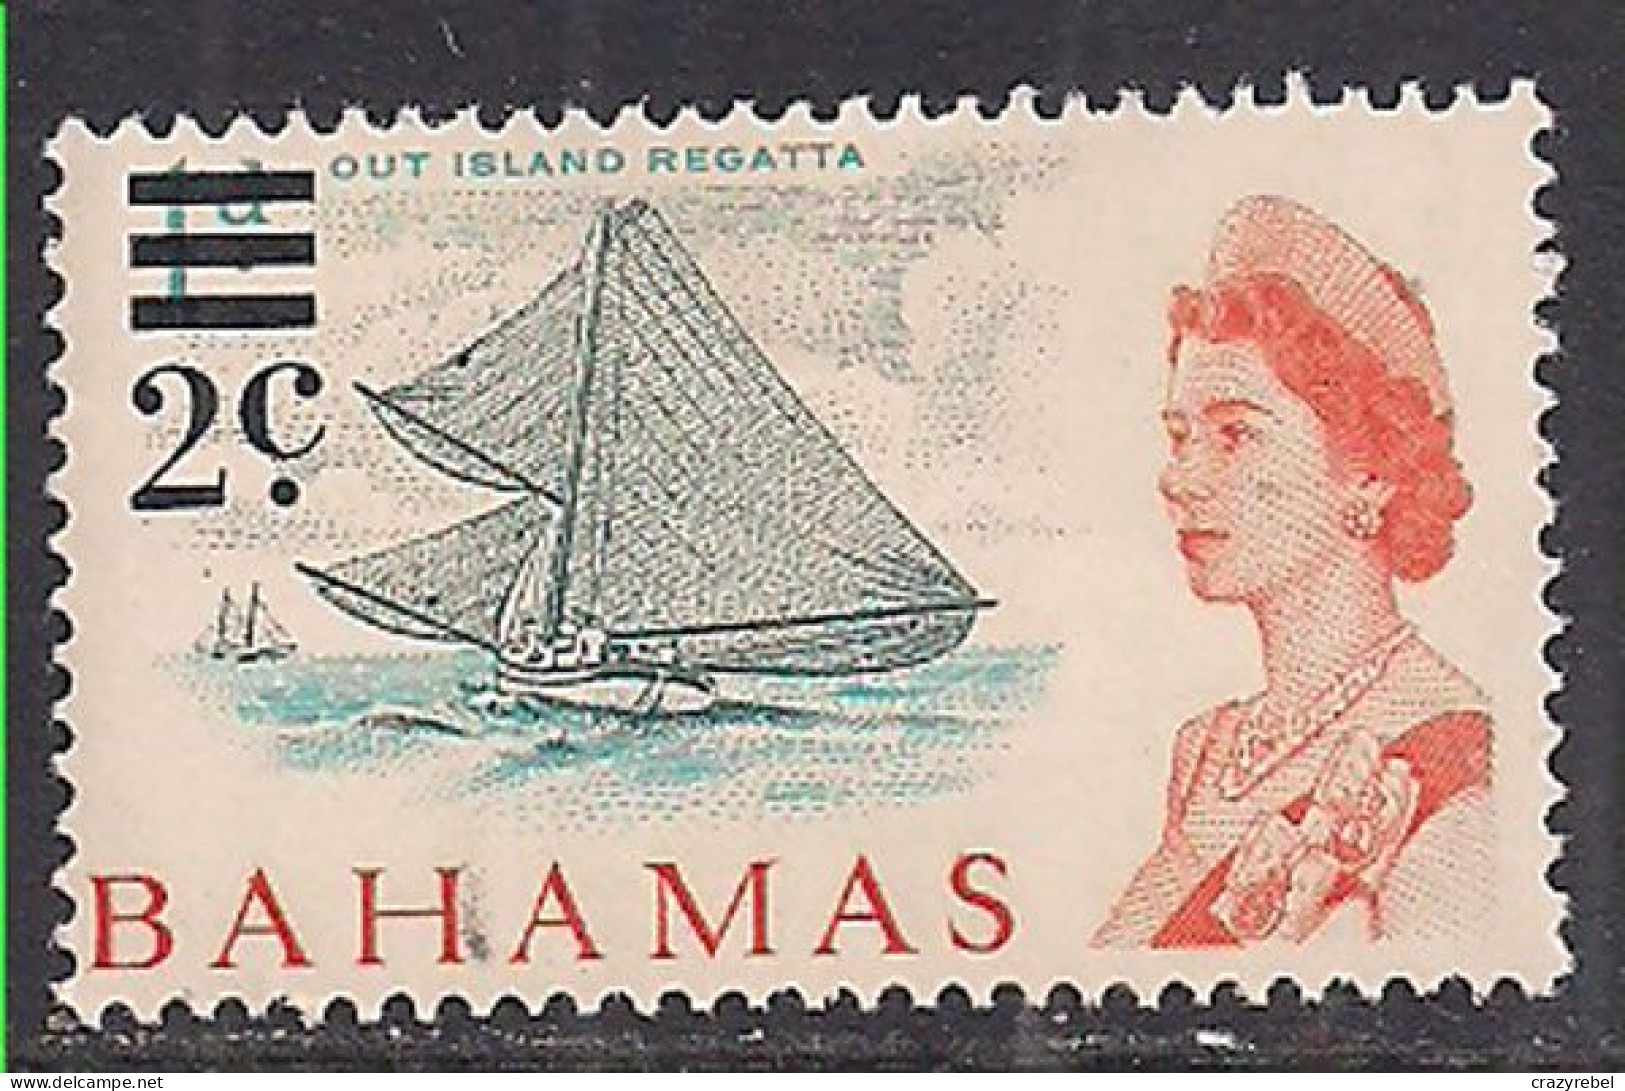 Bahamas 1966 QE2 2c Boat SG 274 MH ( F312 ) - 1963-1973 Ministerial Government